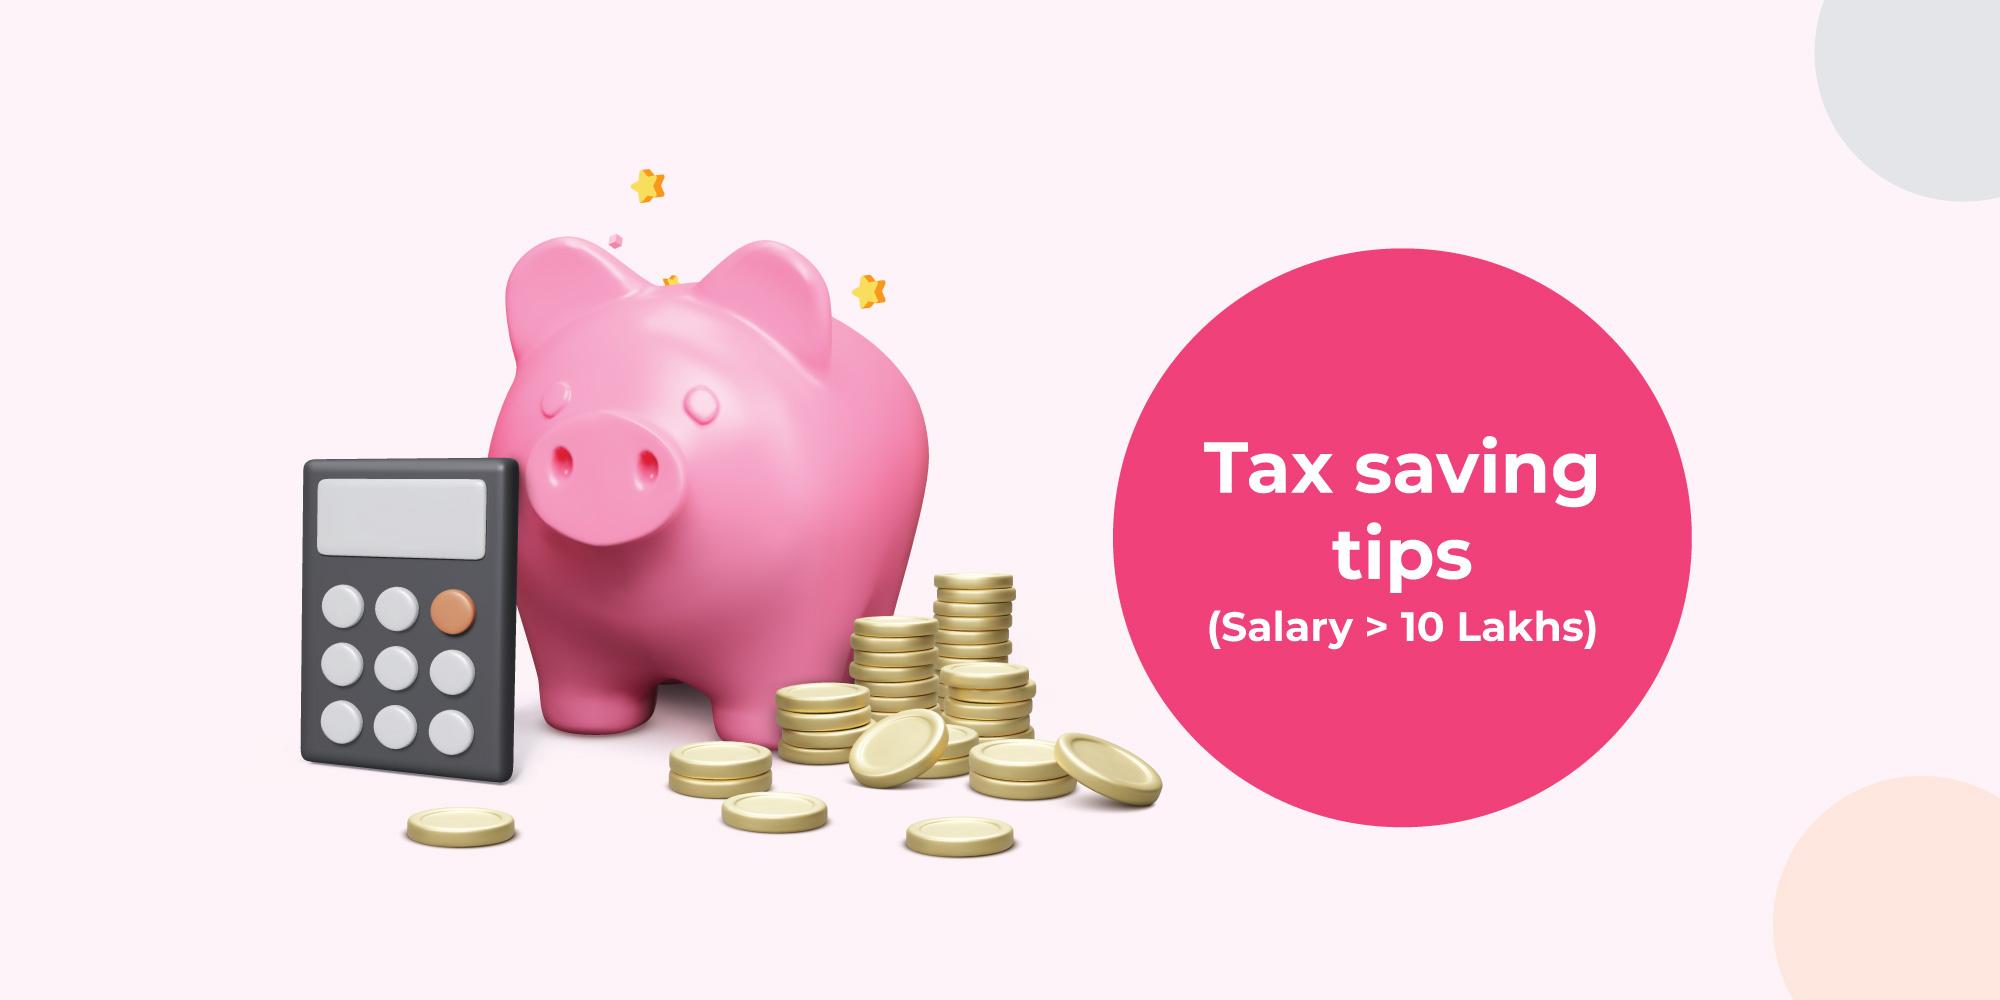 How to save tax on a salary above ₹10 lakhs?